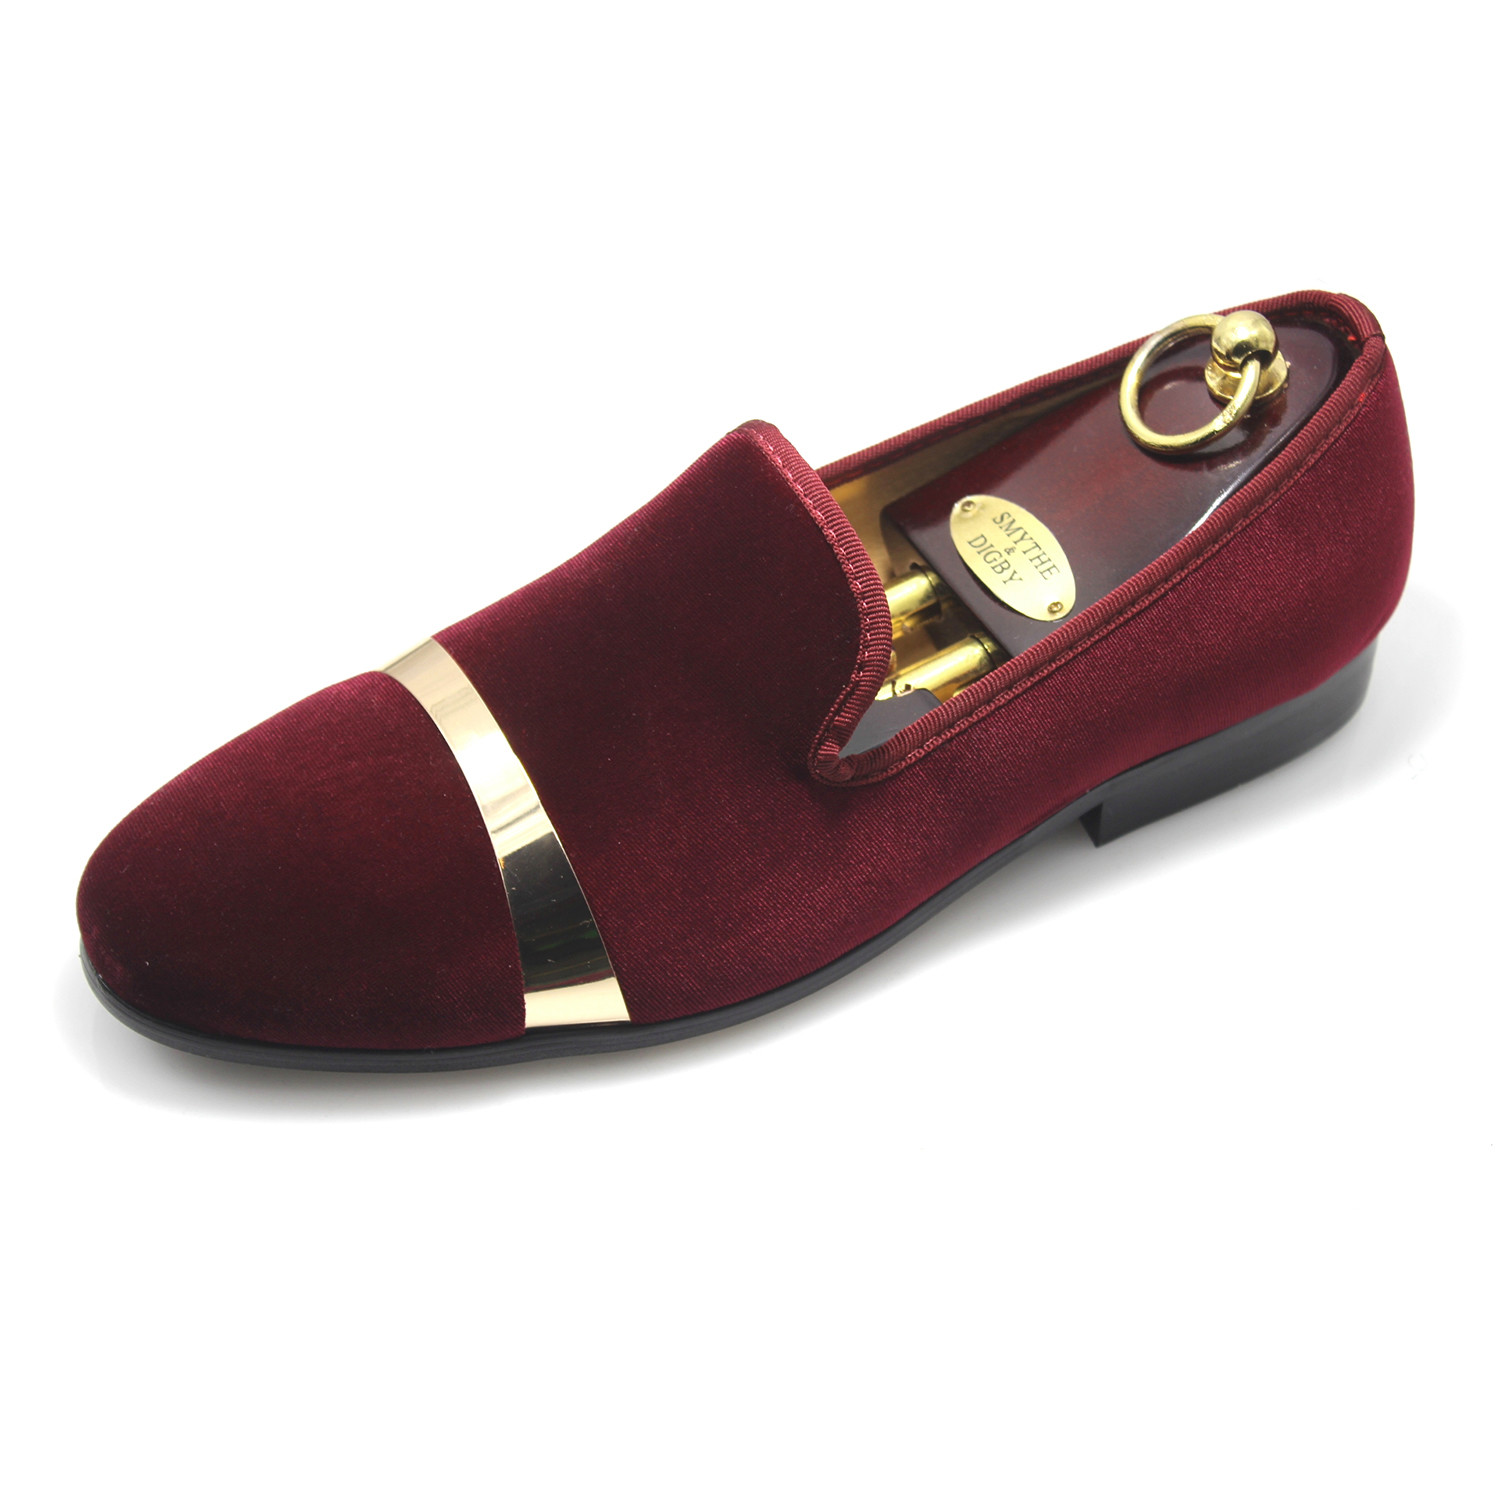 burgundy and gold loafers